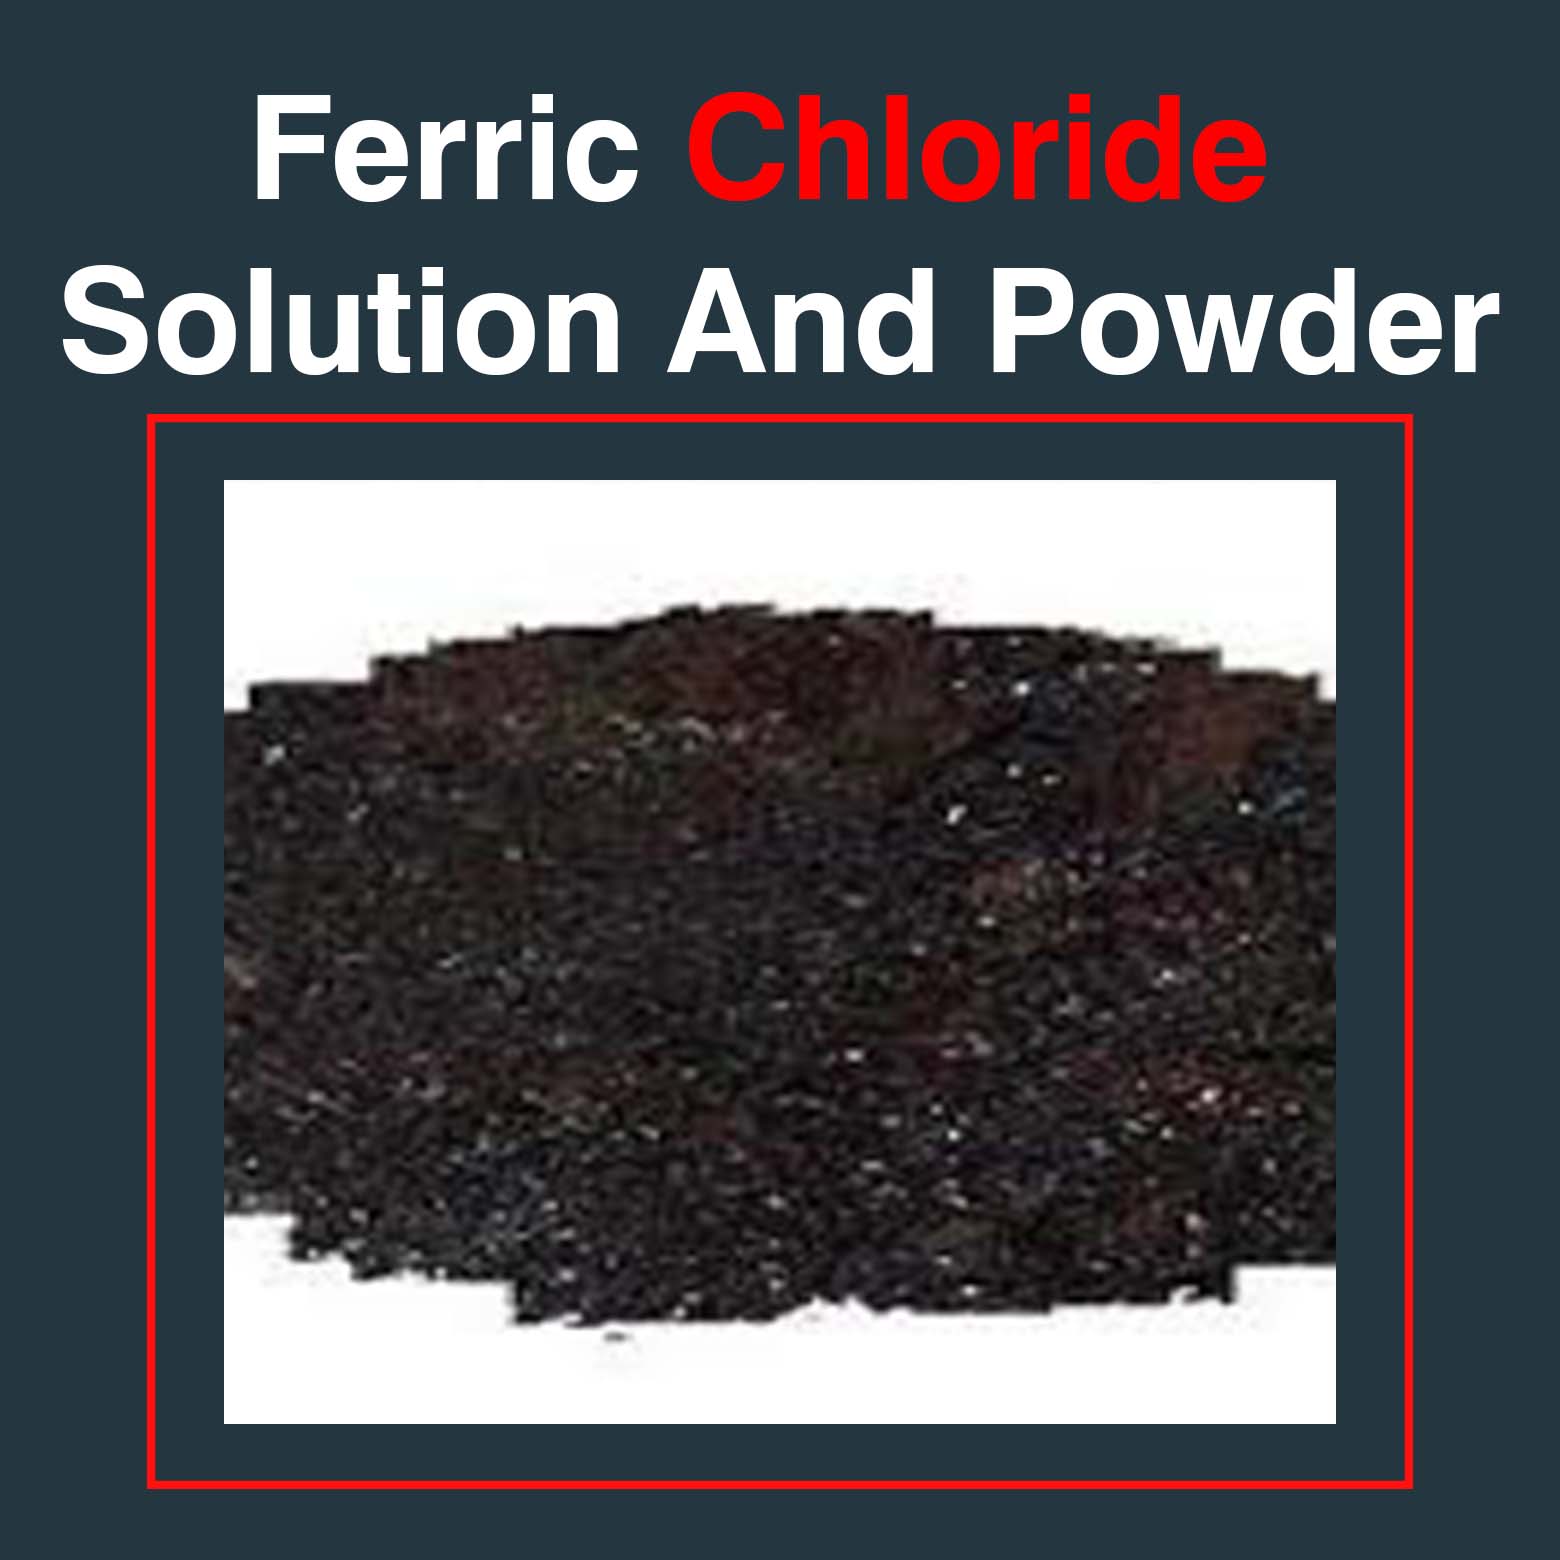 Ferric Chloride Solution And Powder In Sikasso